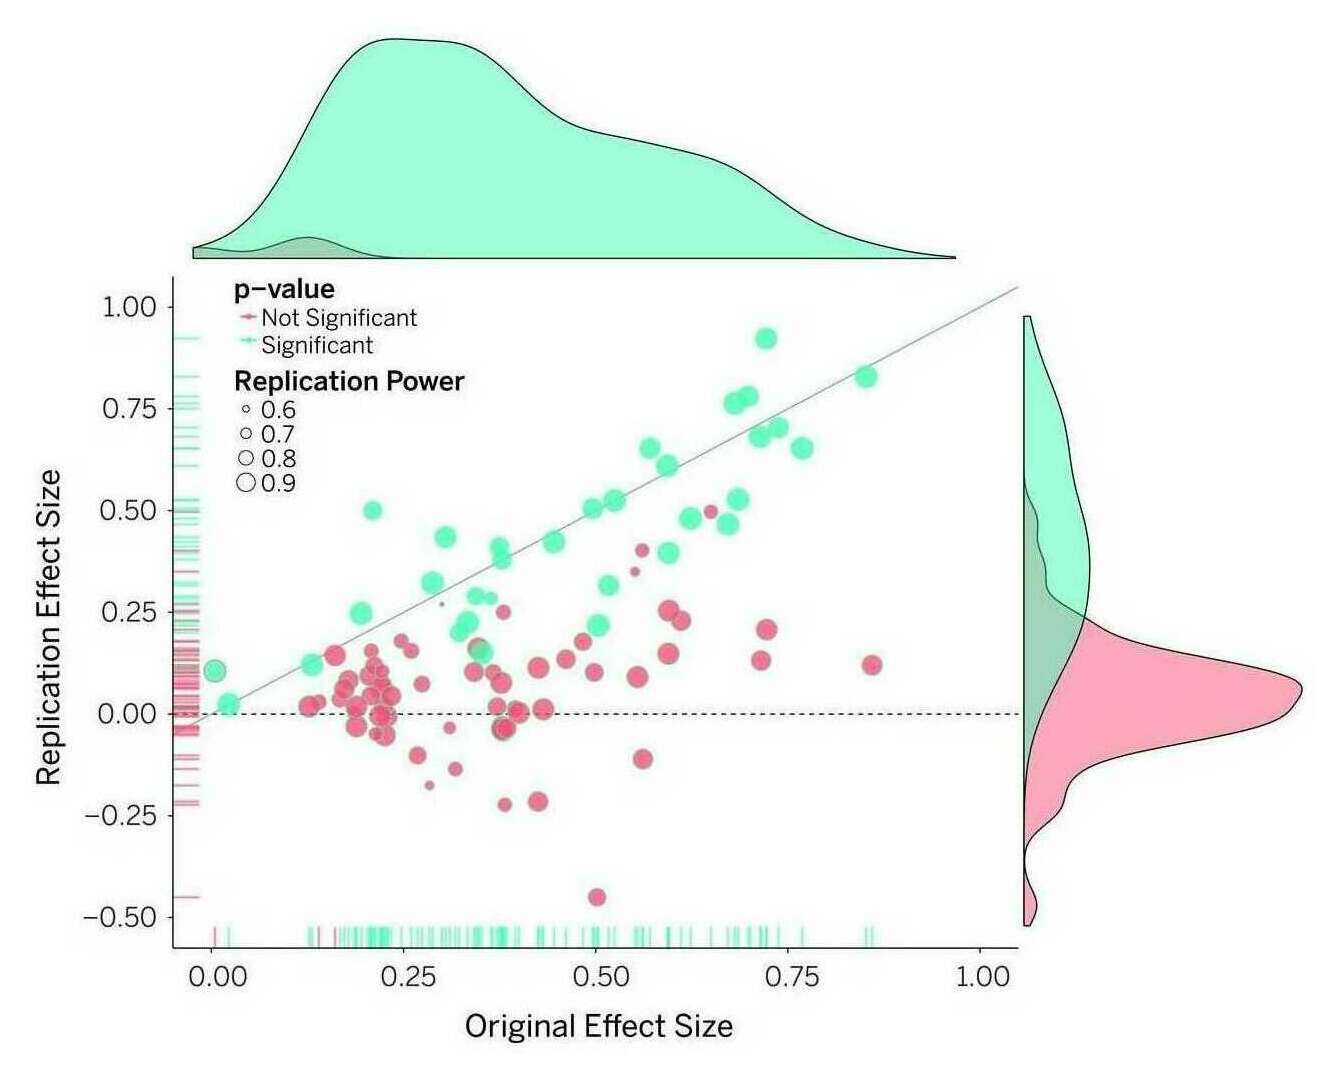 Figure 1: Original study effect size versus replication effect size (correlation coefficients). Diagonal line represents replication effect size equal to original effect size. Dotted line represents replication effect size of 0. Points below the dotted line were effects in the opposite direction of the original. Density plots are separated by statistically-significant (blue) and non-statistically-significant (red) effects.